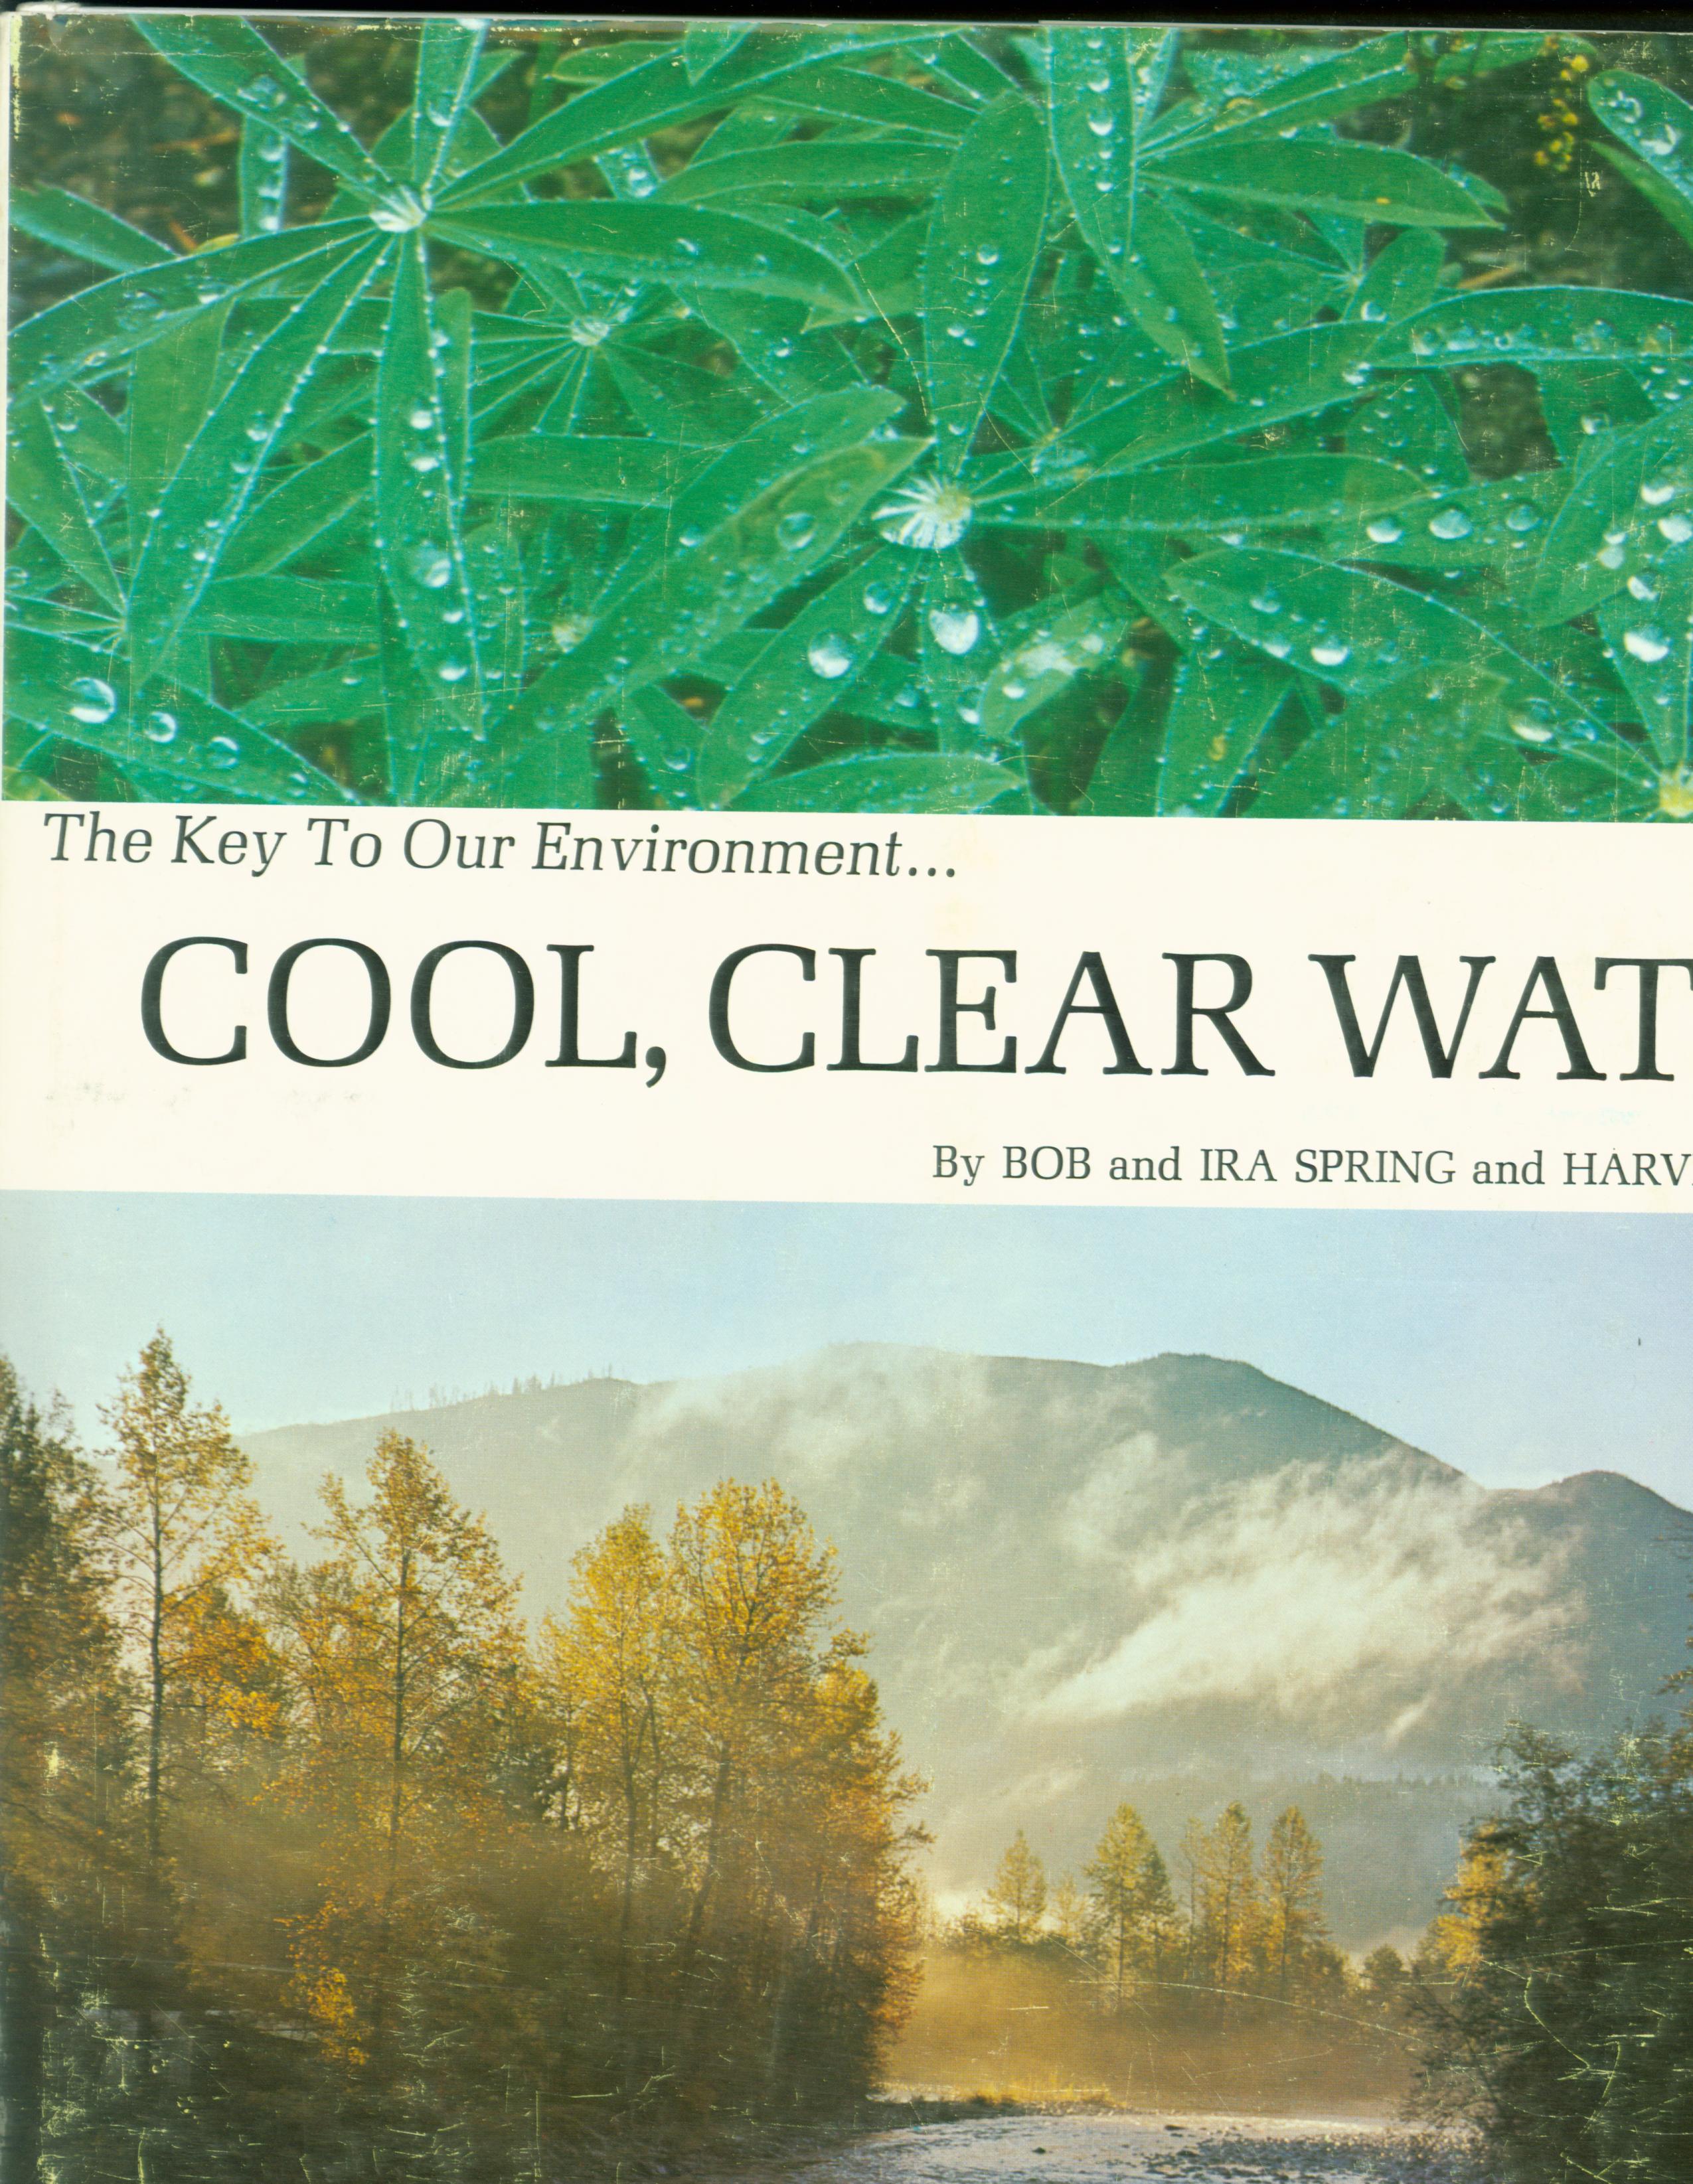 COOL, CLEAR WATER: the key to our environment.